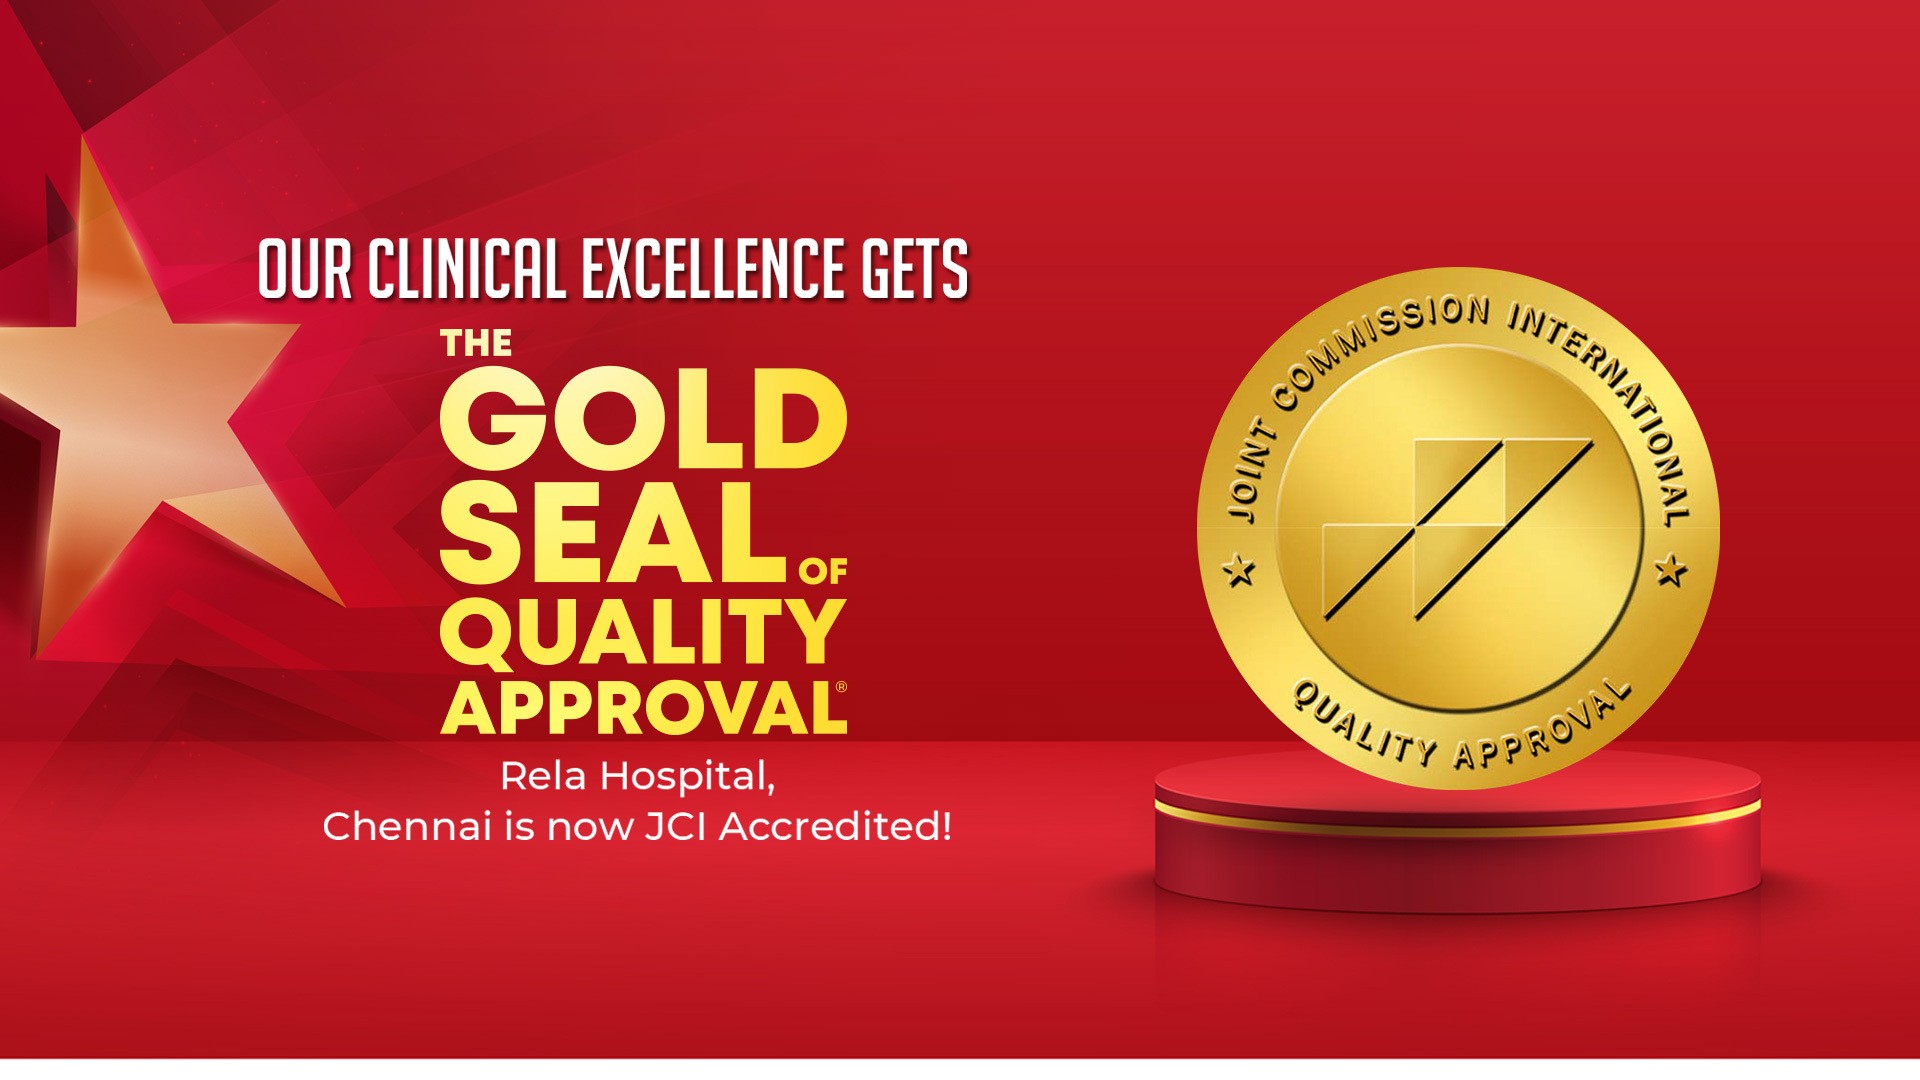 Our Clinical Excellence - The Gold Seal of Quality Approval